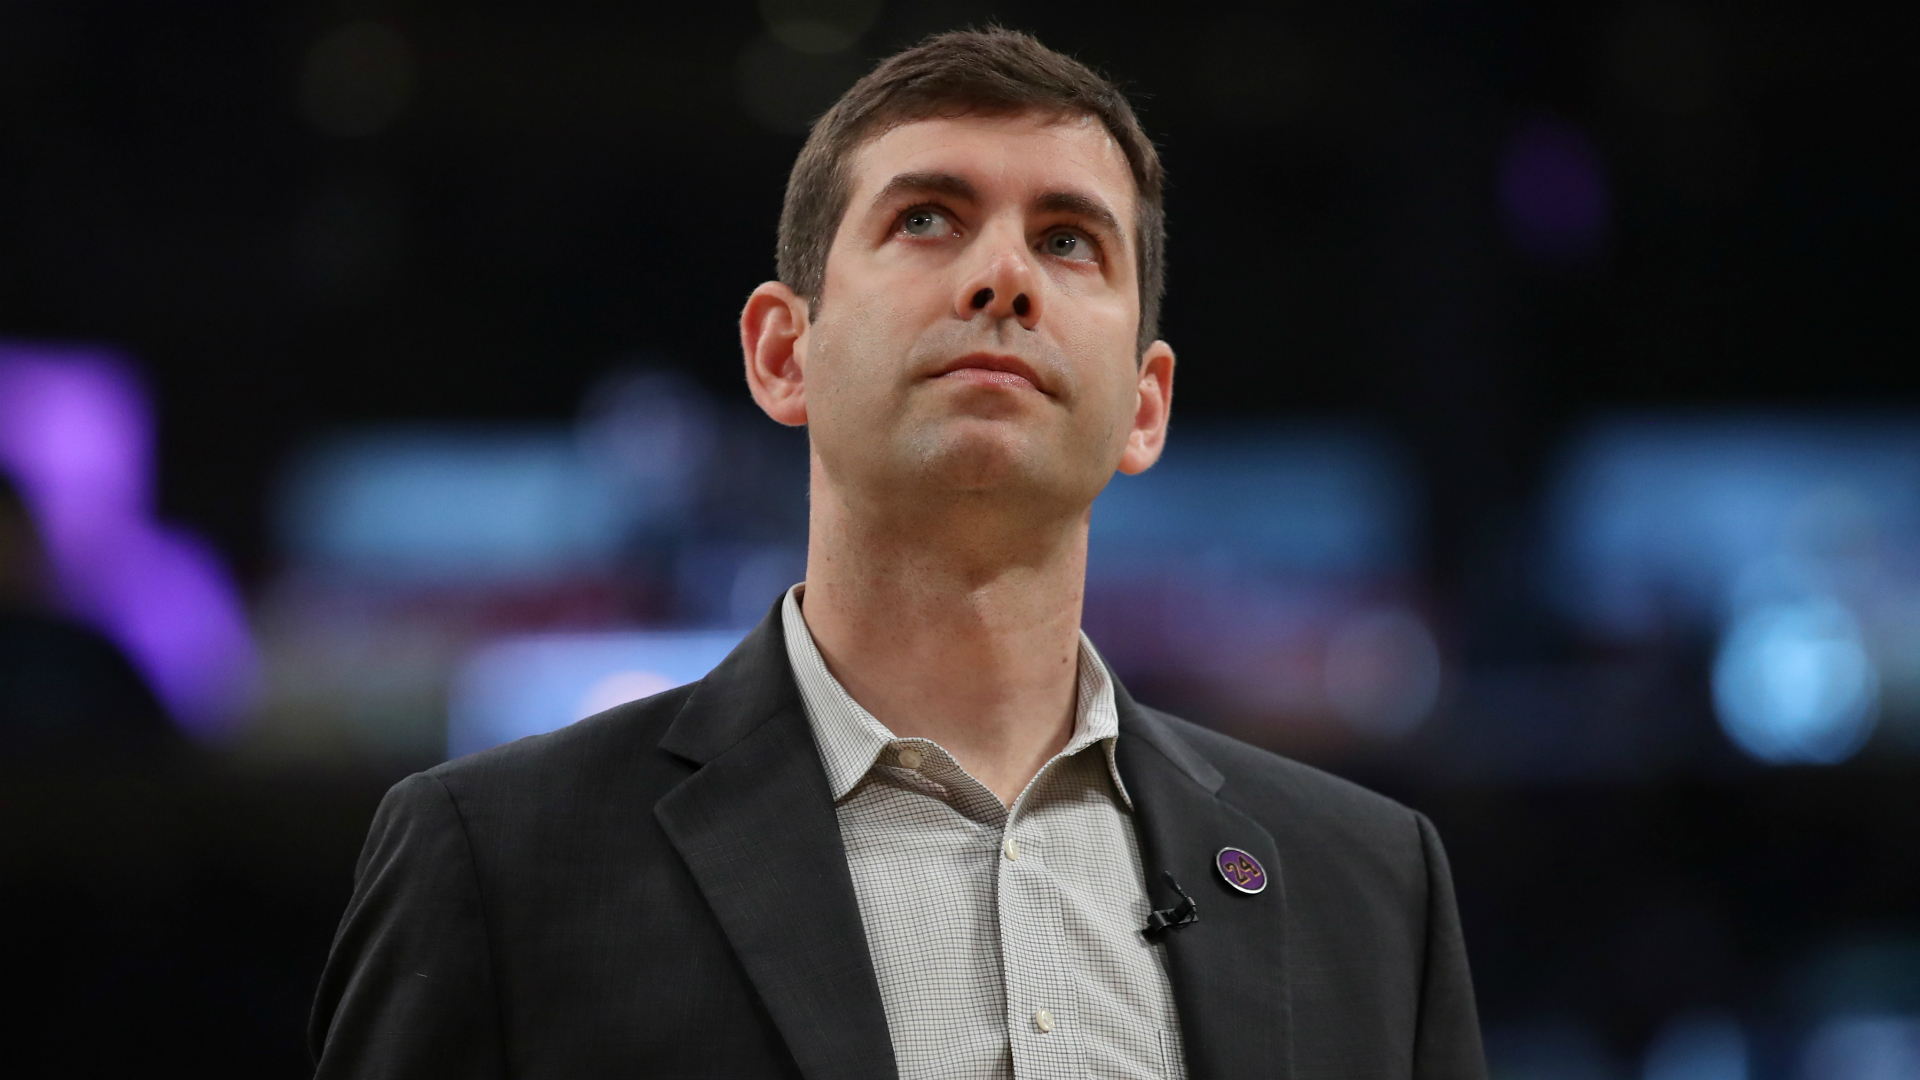 Brad Stevens penned a letter to his Boston Celtics team after George Floyd died in Minneapolis last week.